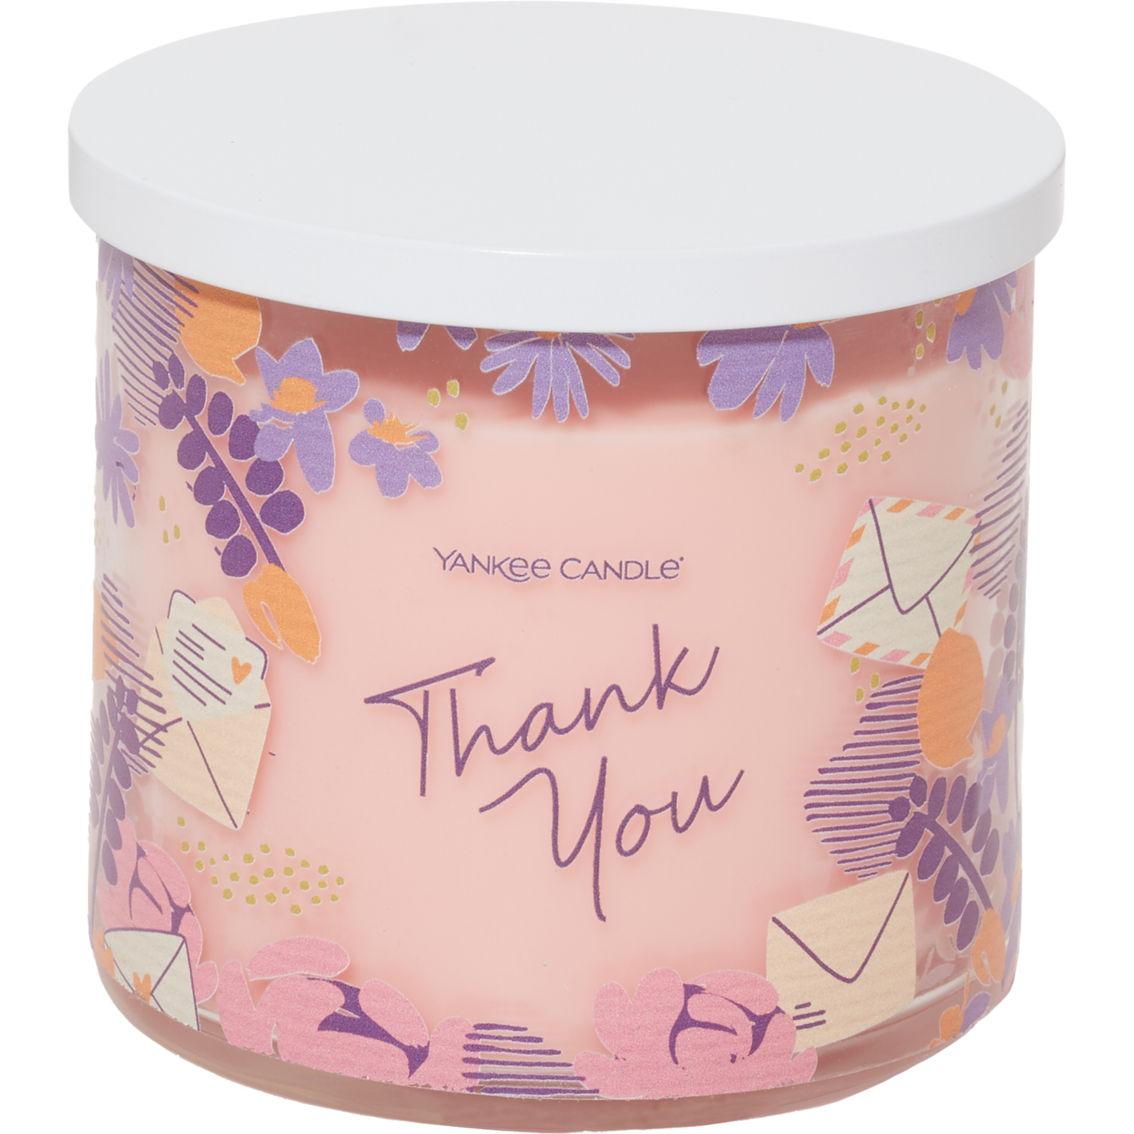 Yankee Candle Thank You 3-Wick Candle - Image 2 of 2